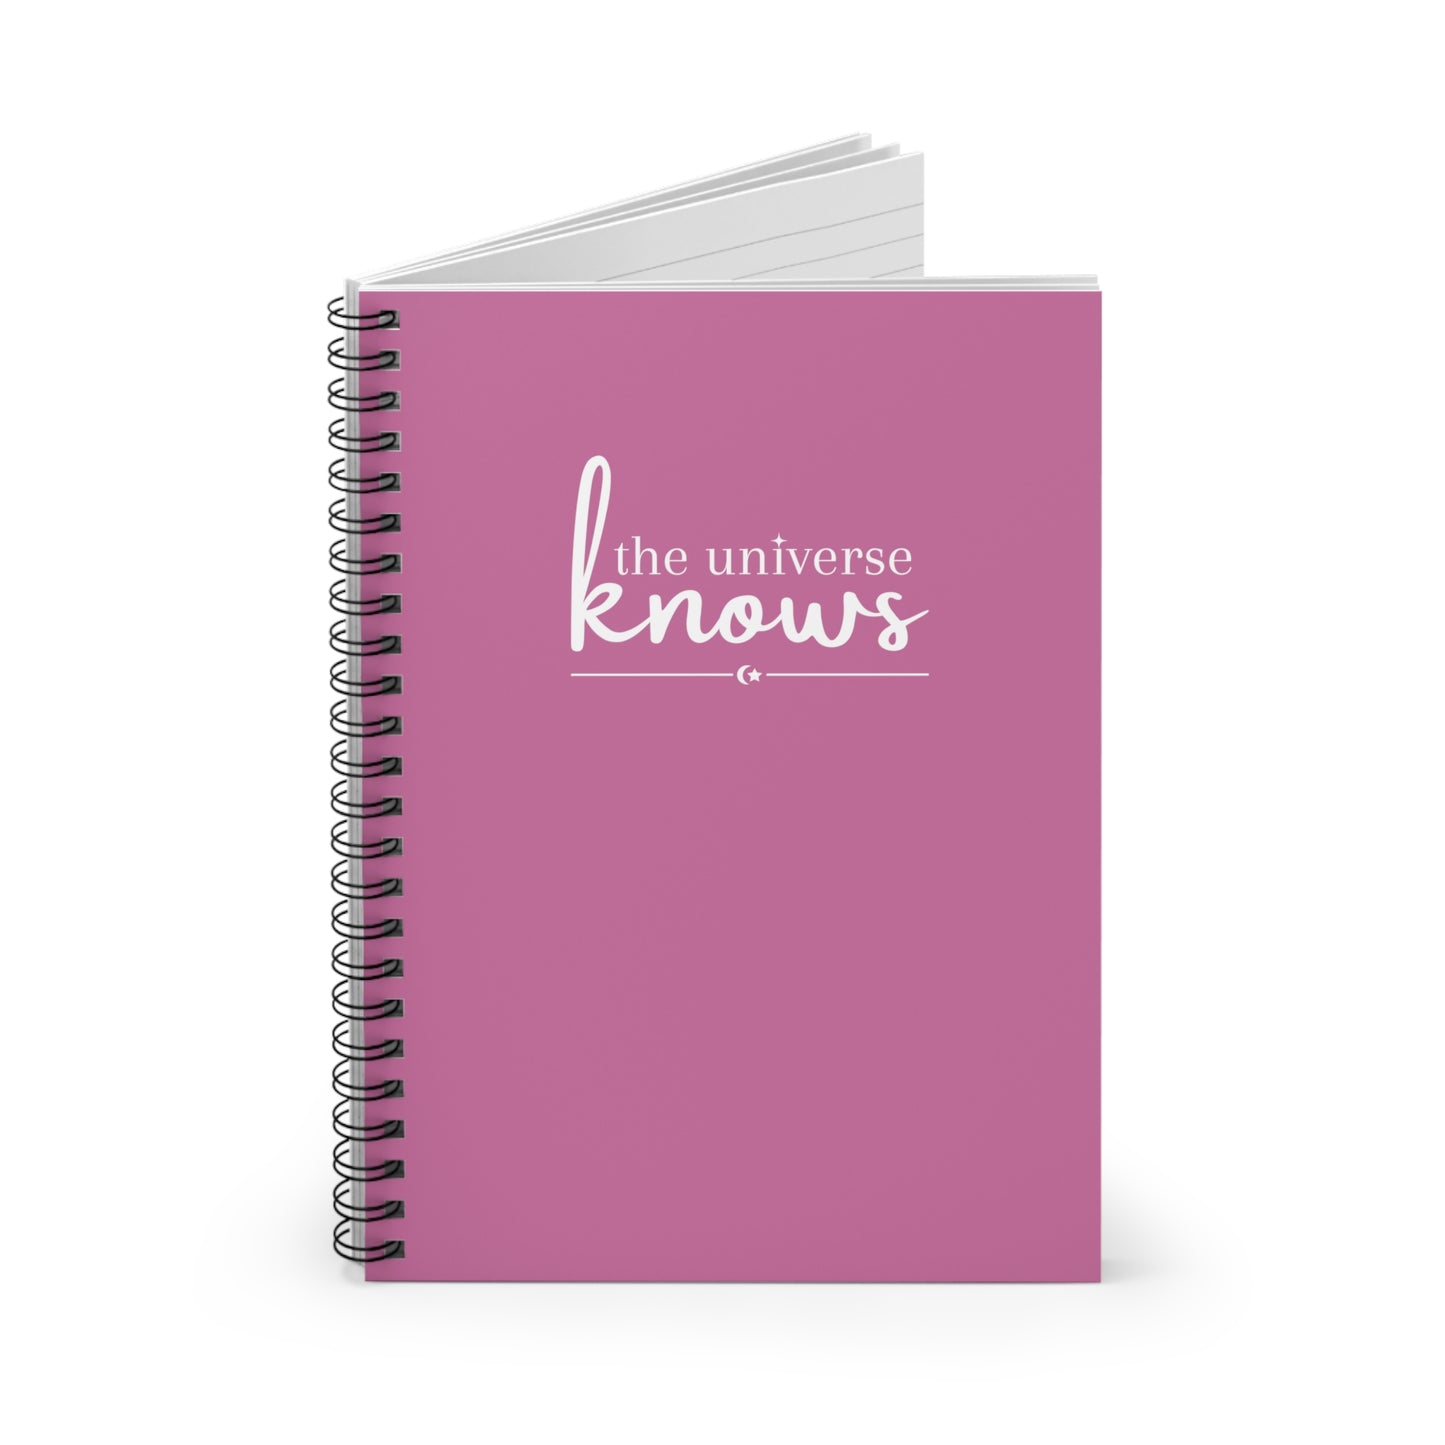 The Universe Knows Pink Spiral Notebook - Ruled Line